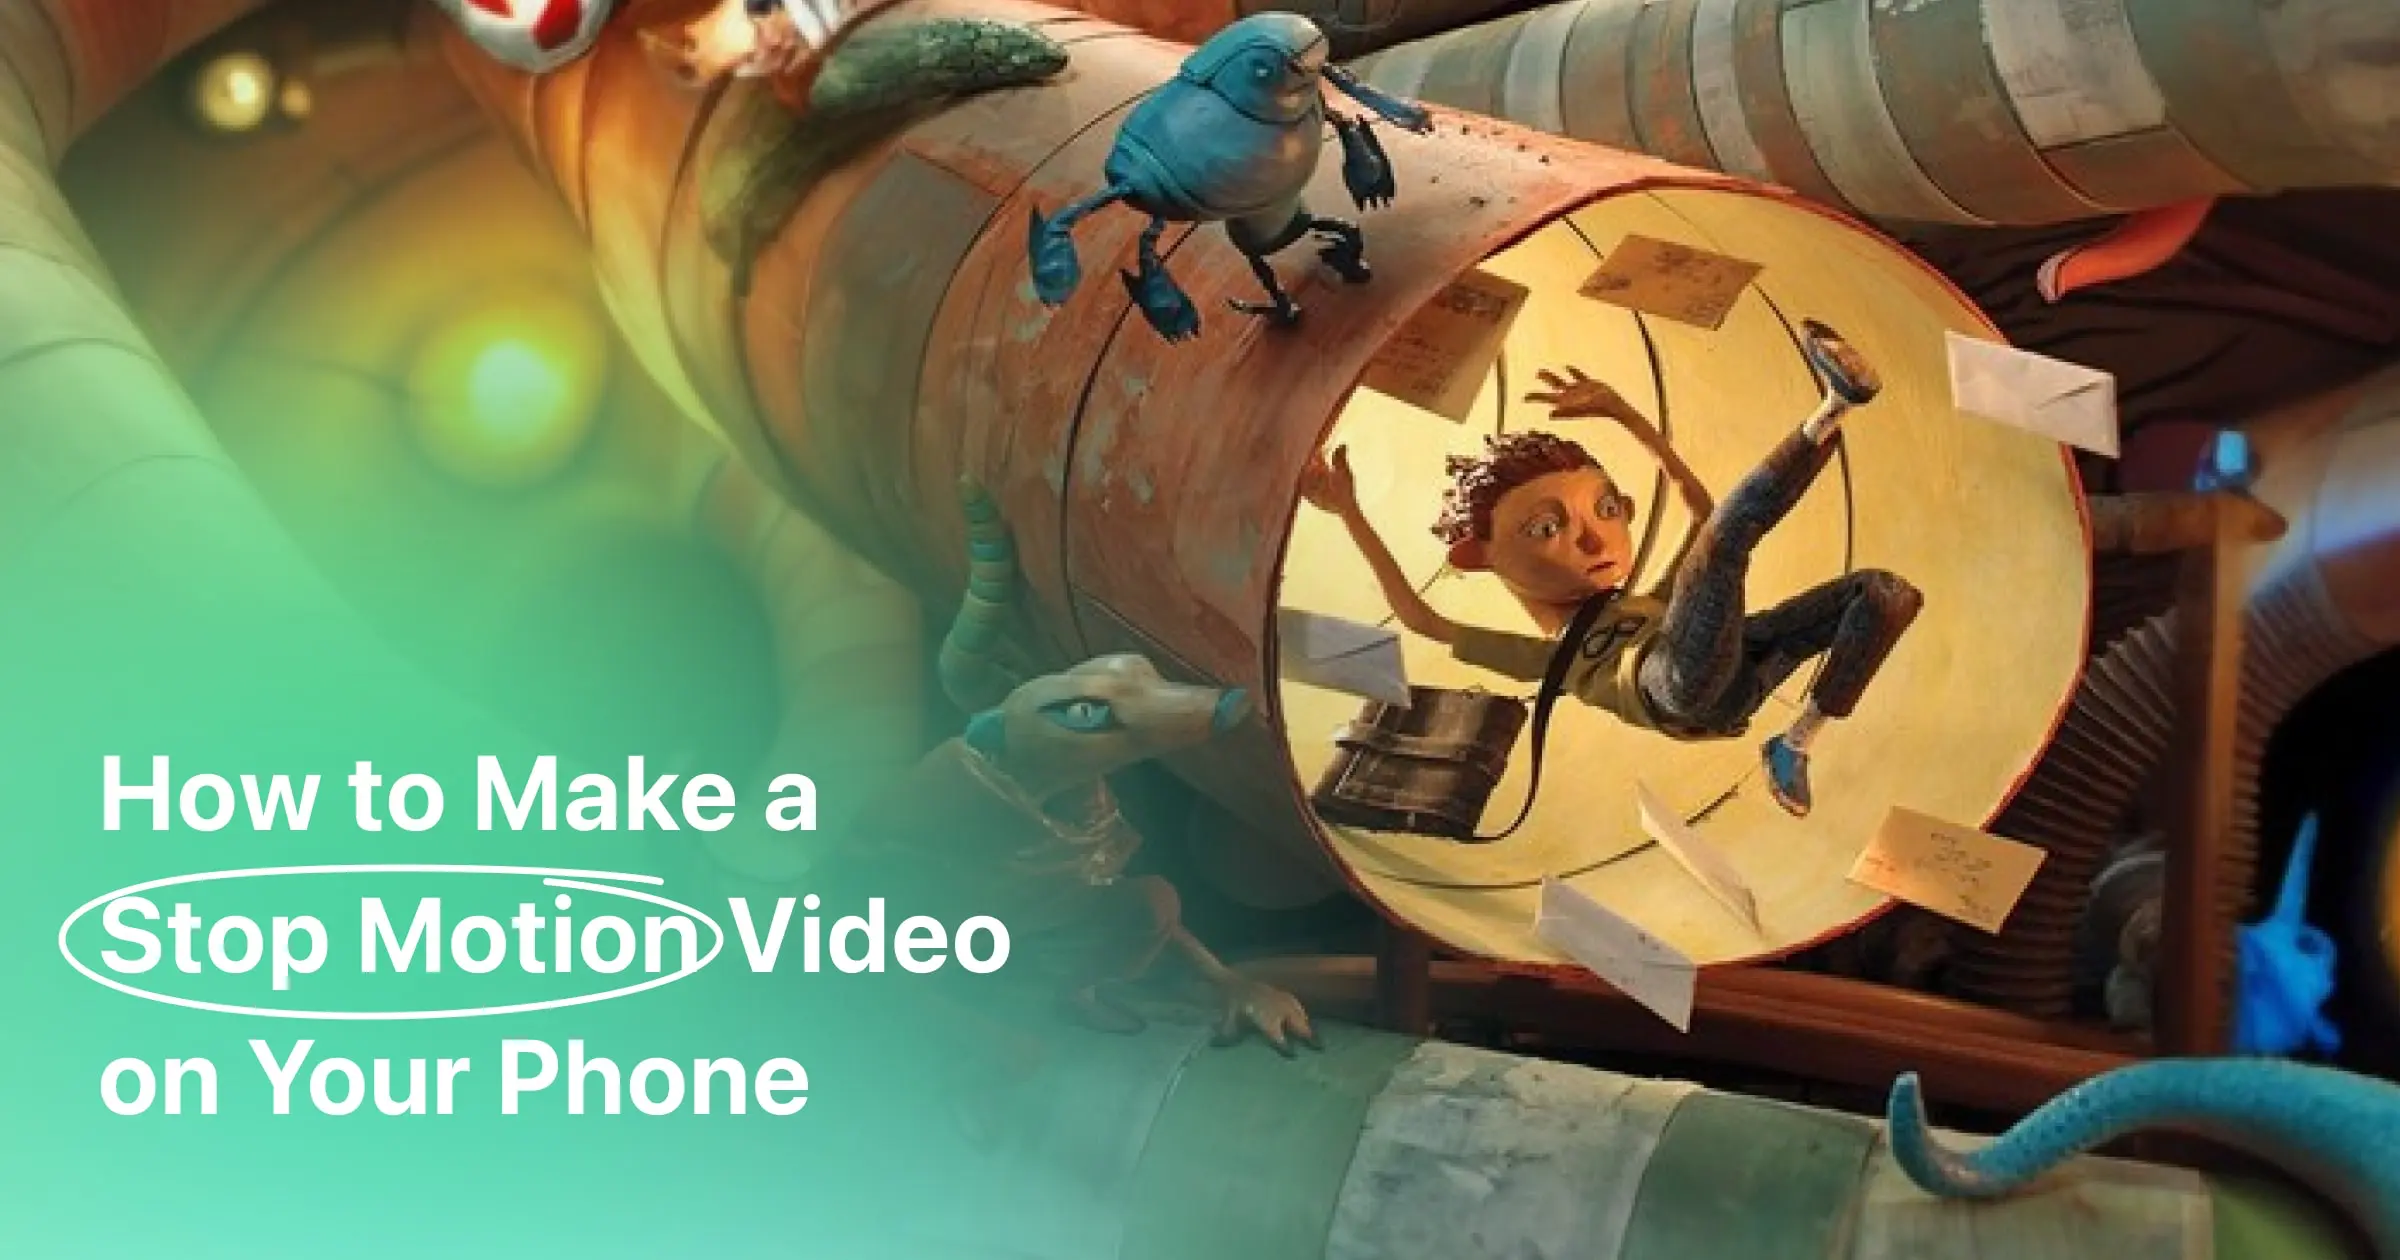 How to Make a Stop Motion Video on Your Phone